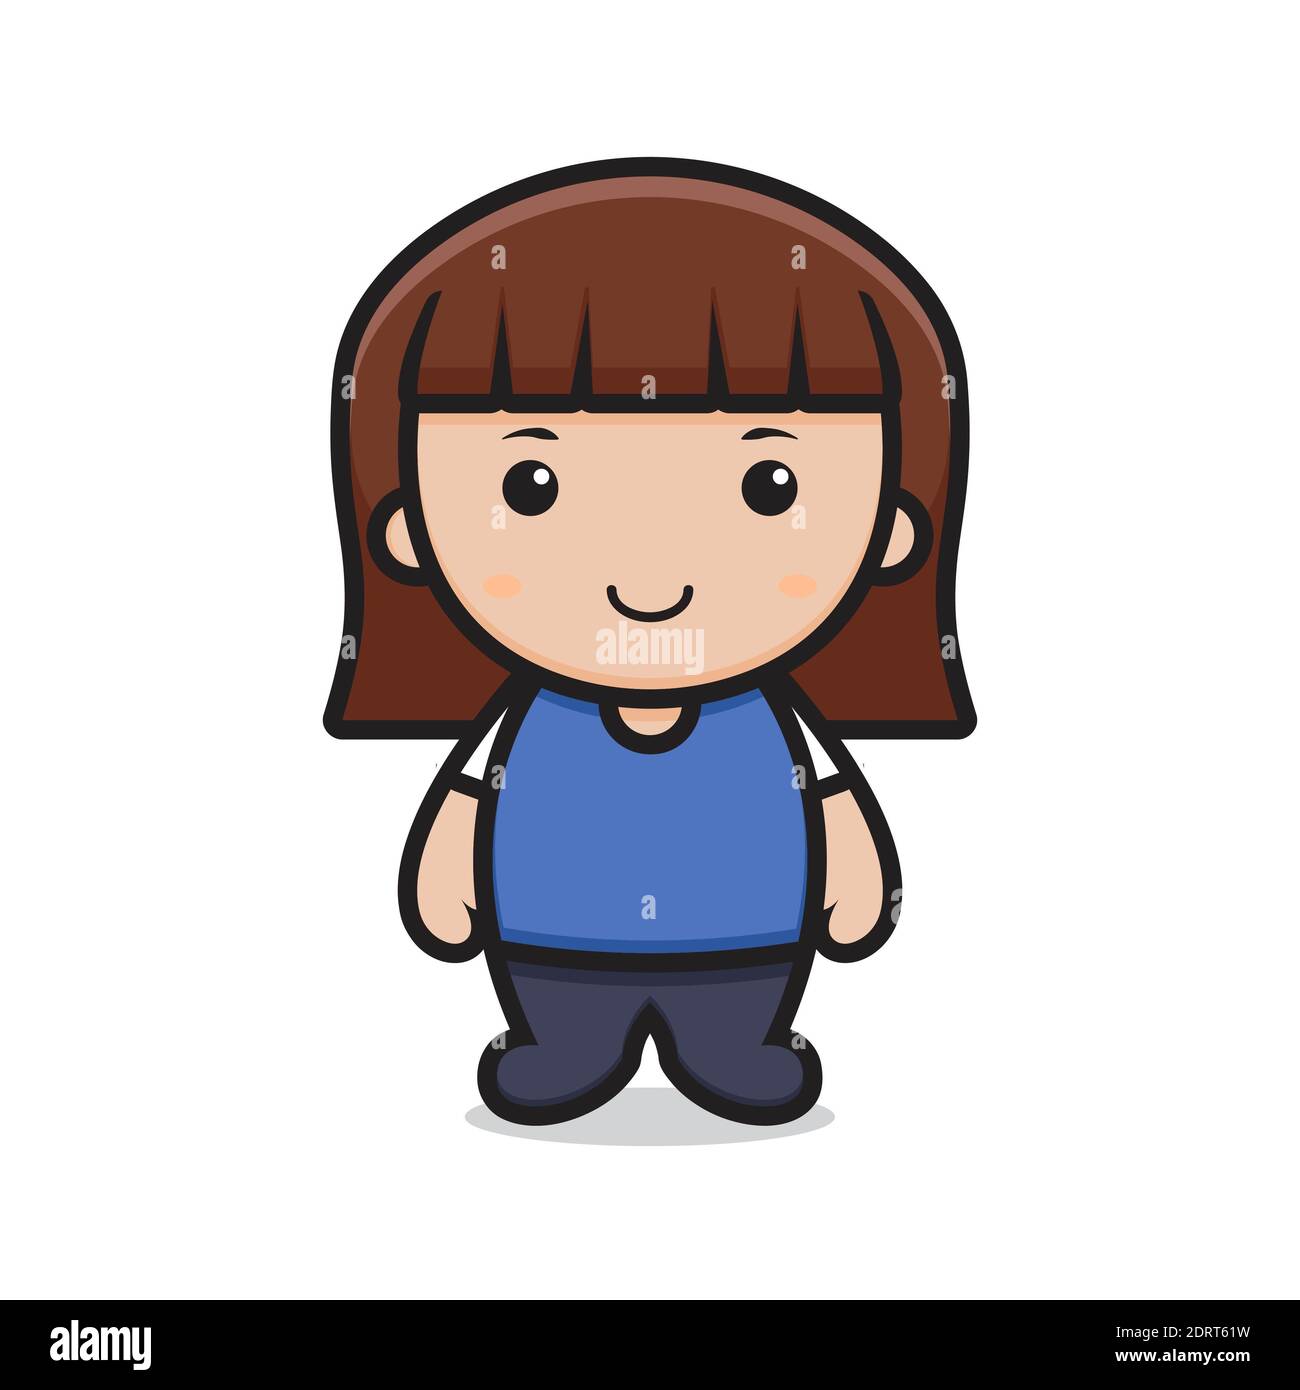 cute girl cartoon character brown hair. design isolated on white background  Stock Photo - Alamy